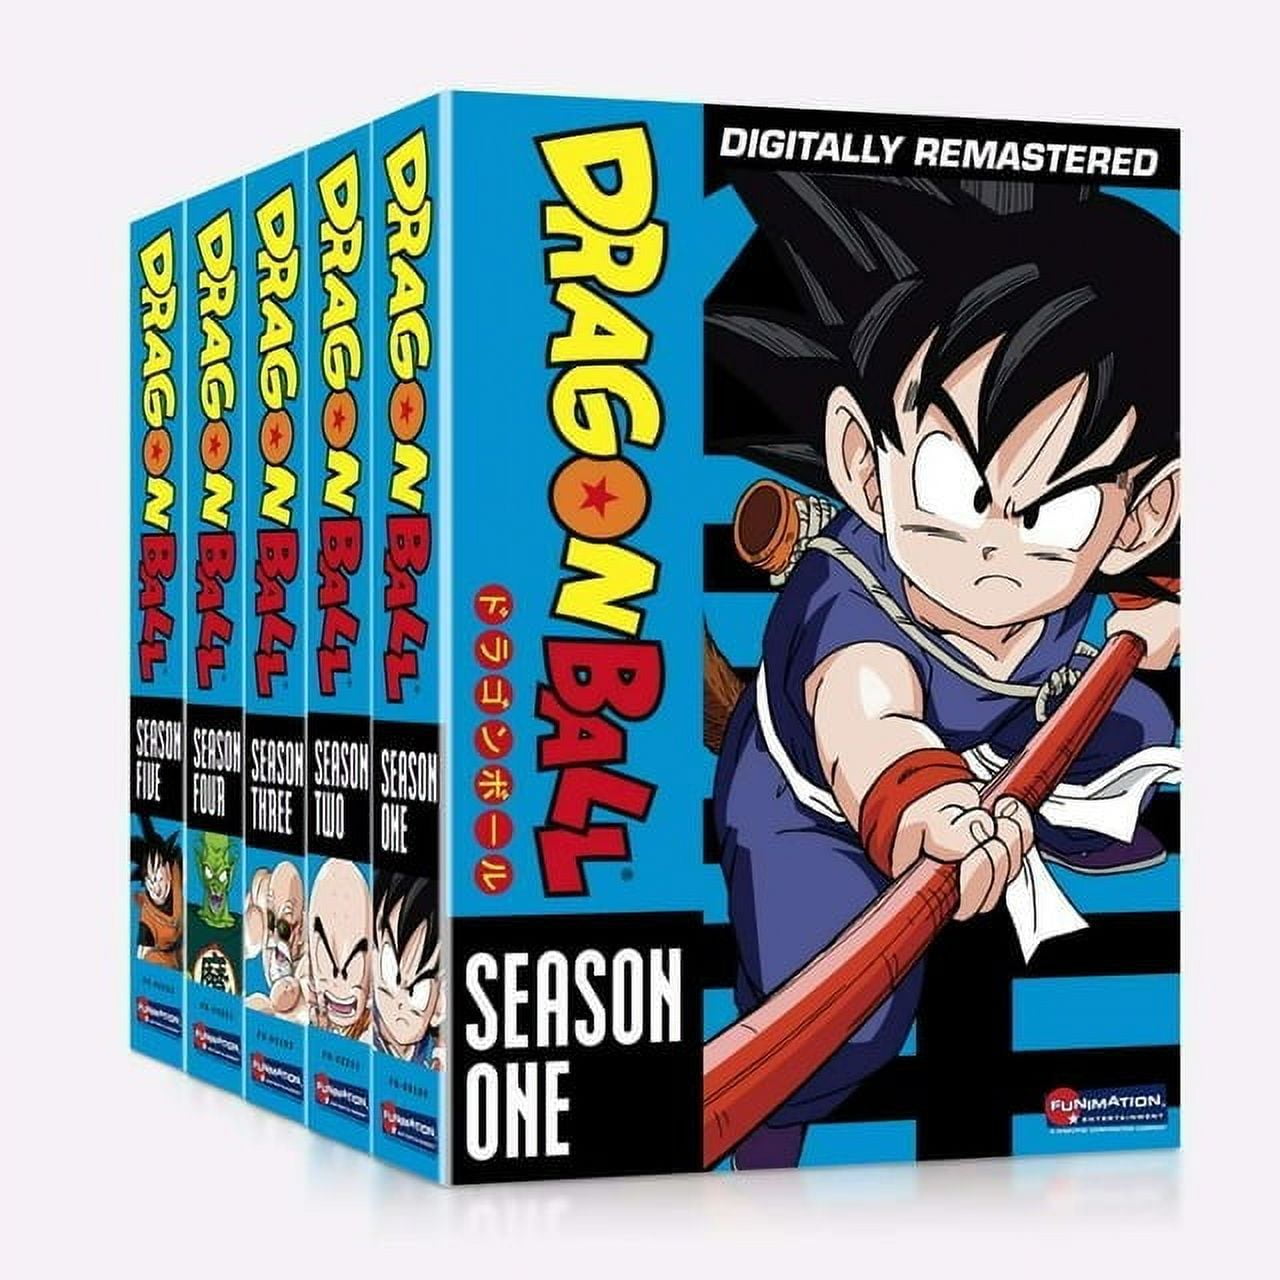  Dragon Ball: Complete Series Seasons 1-5 DVD Box Sets for  Region 1 (US AND CANADA) by Royal Signet Entertainment : Movies & TV